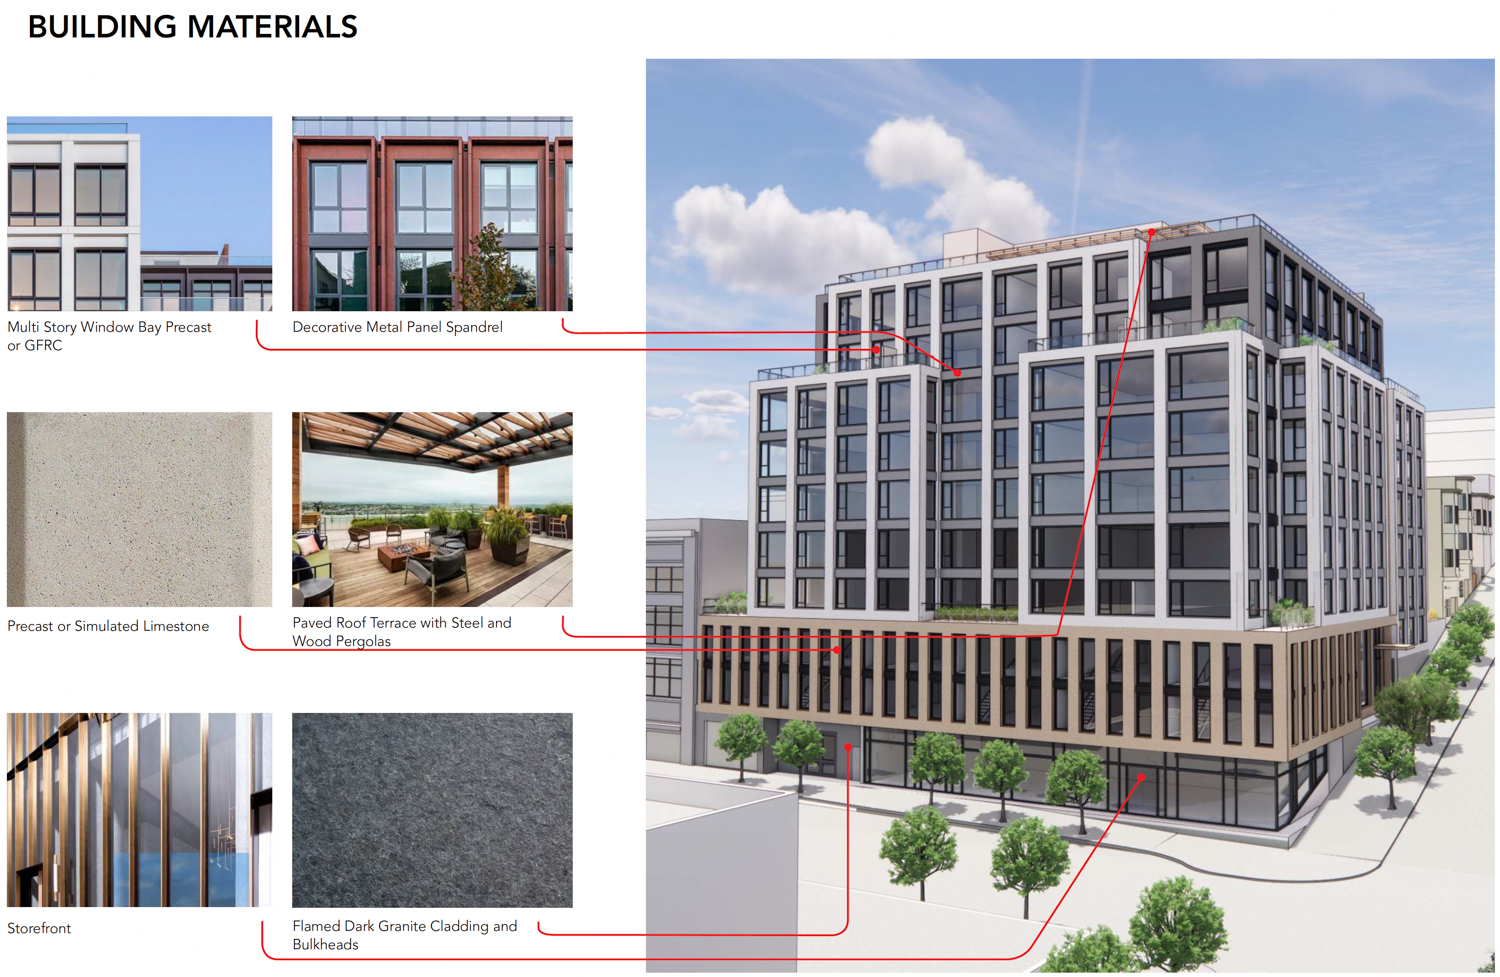 955 Sansome Street building materials illustrated, rendering by Handel Architects